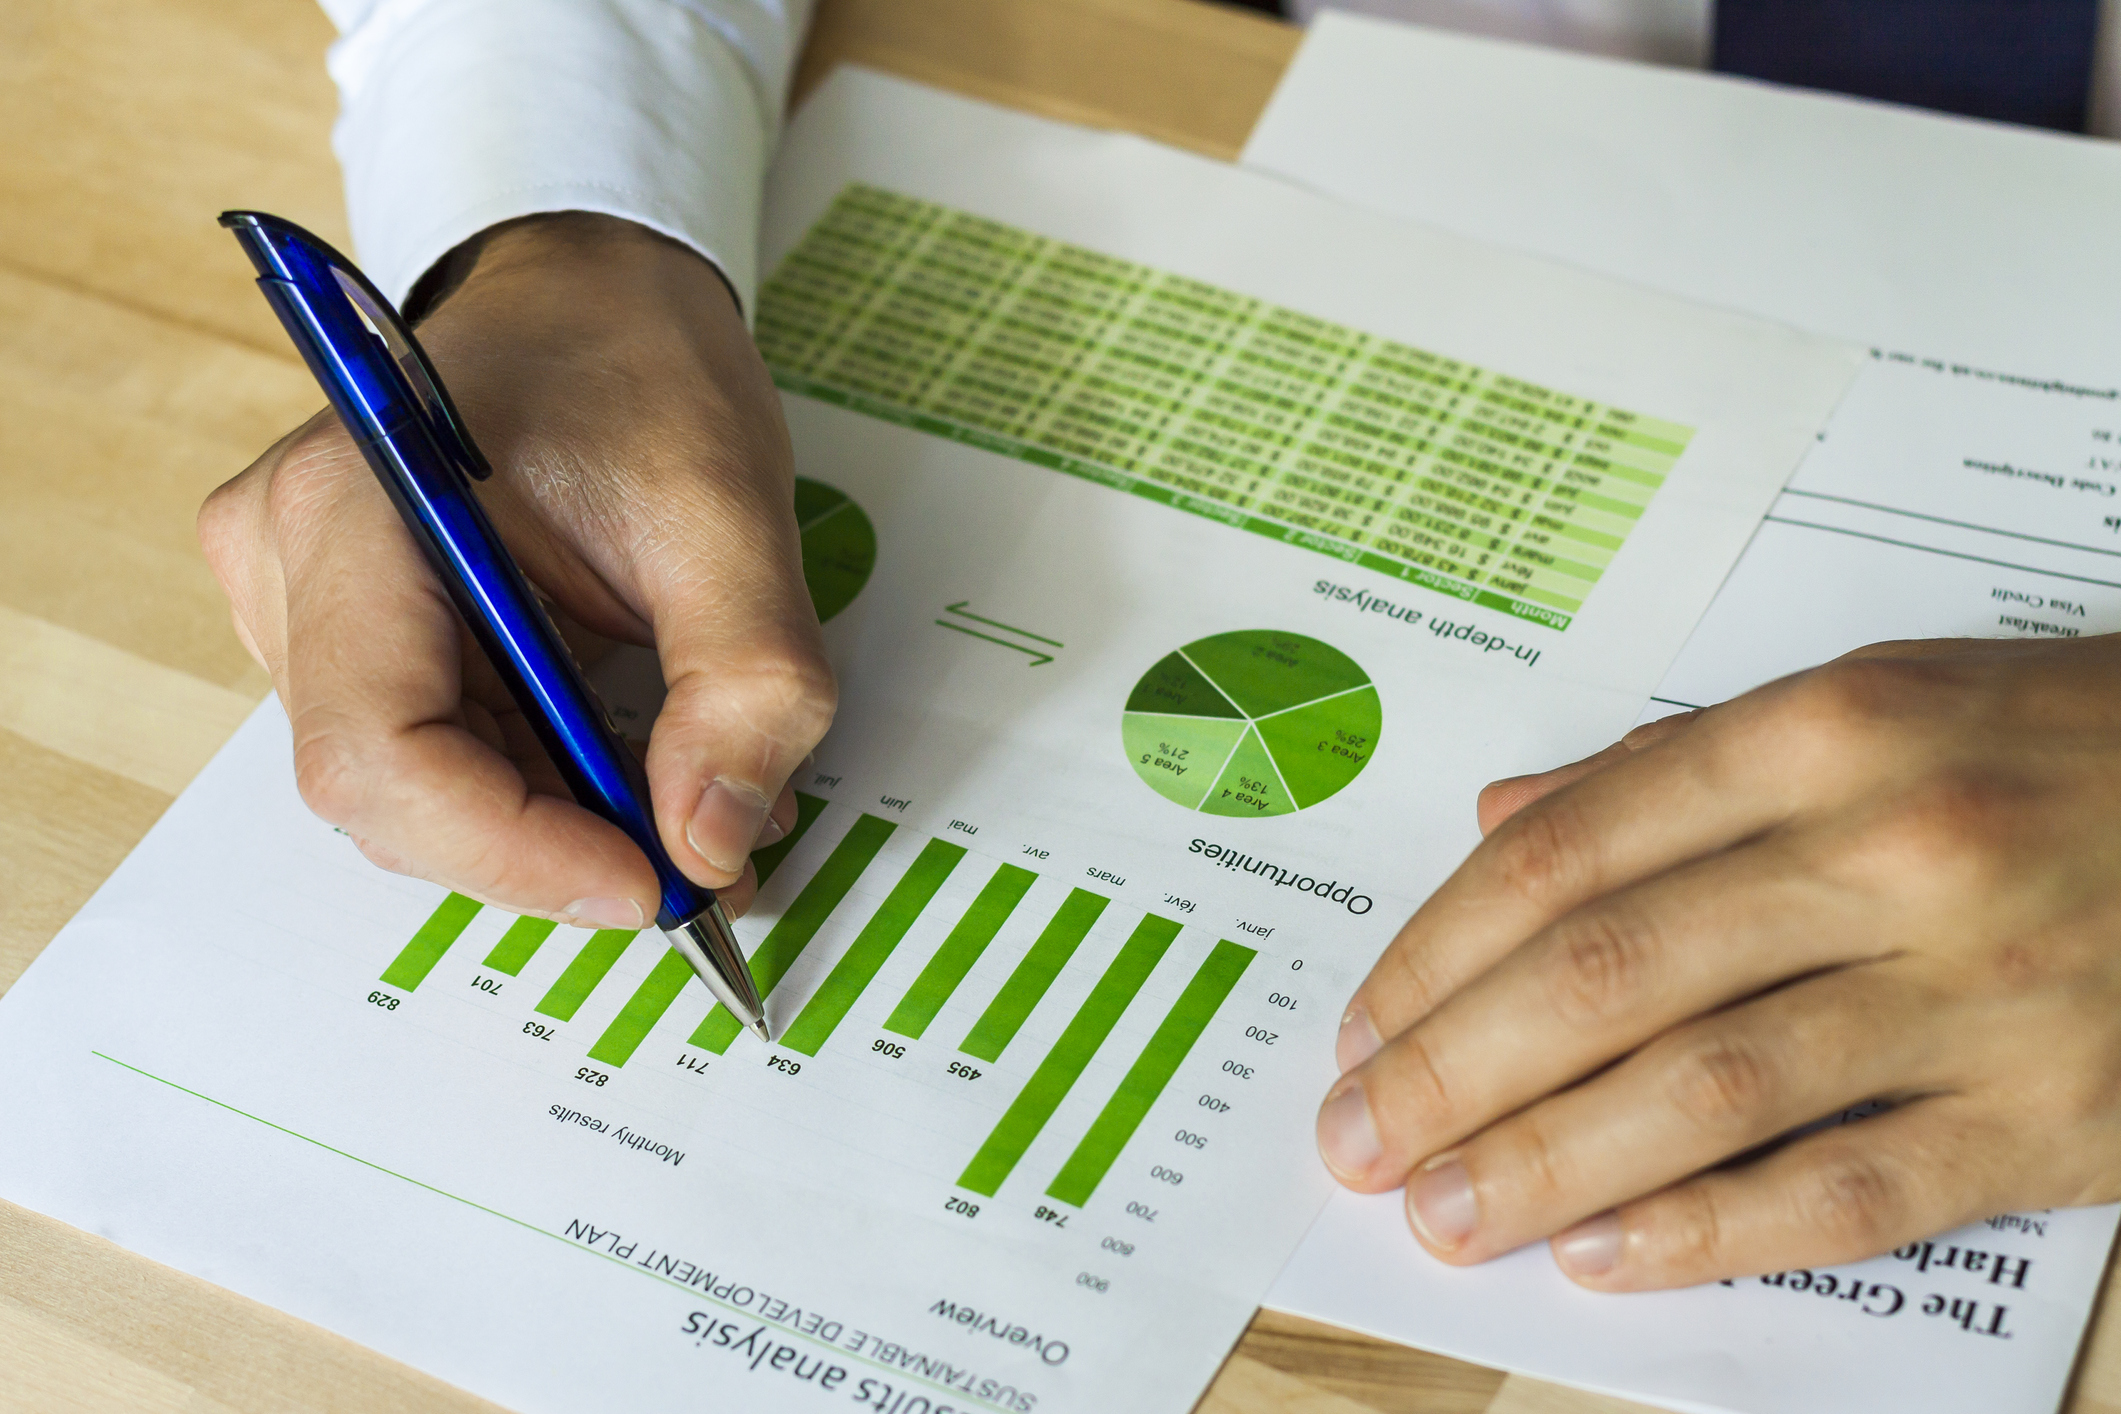 What are the Roles of Budgets and Performance Reports in Business?